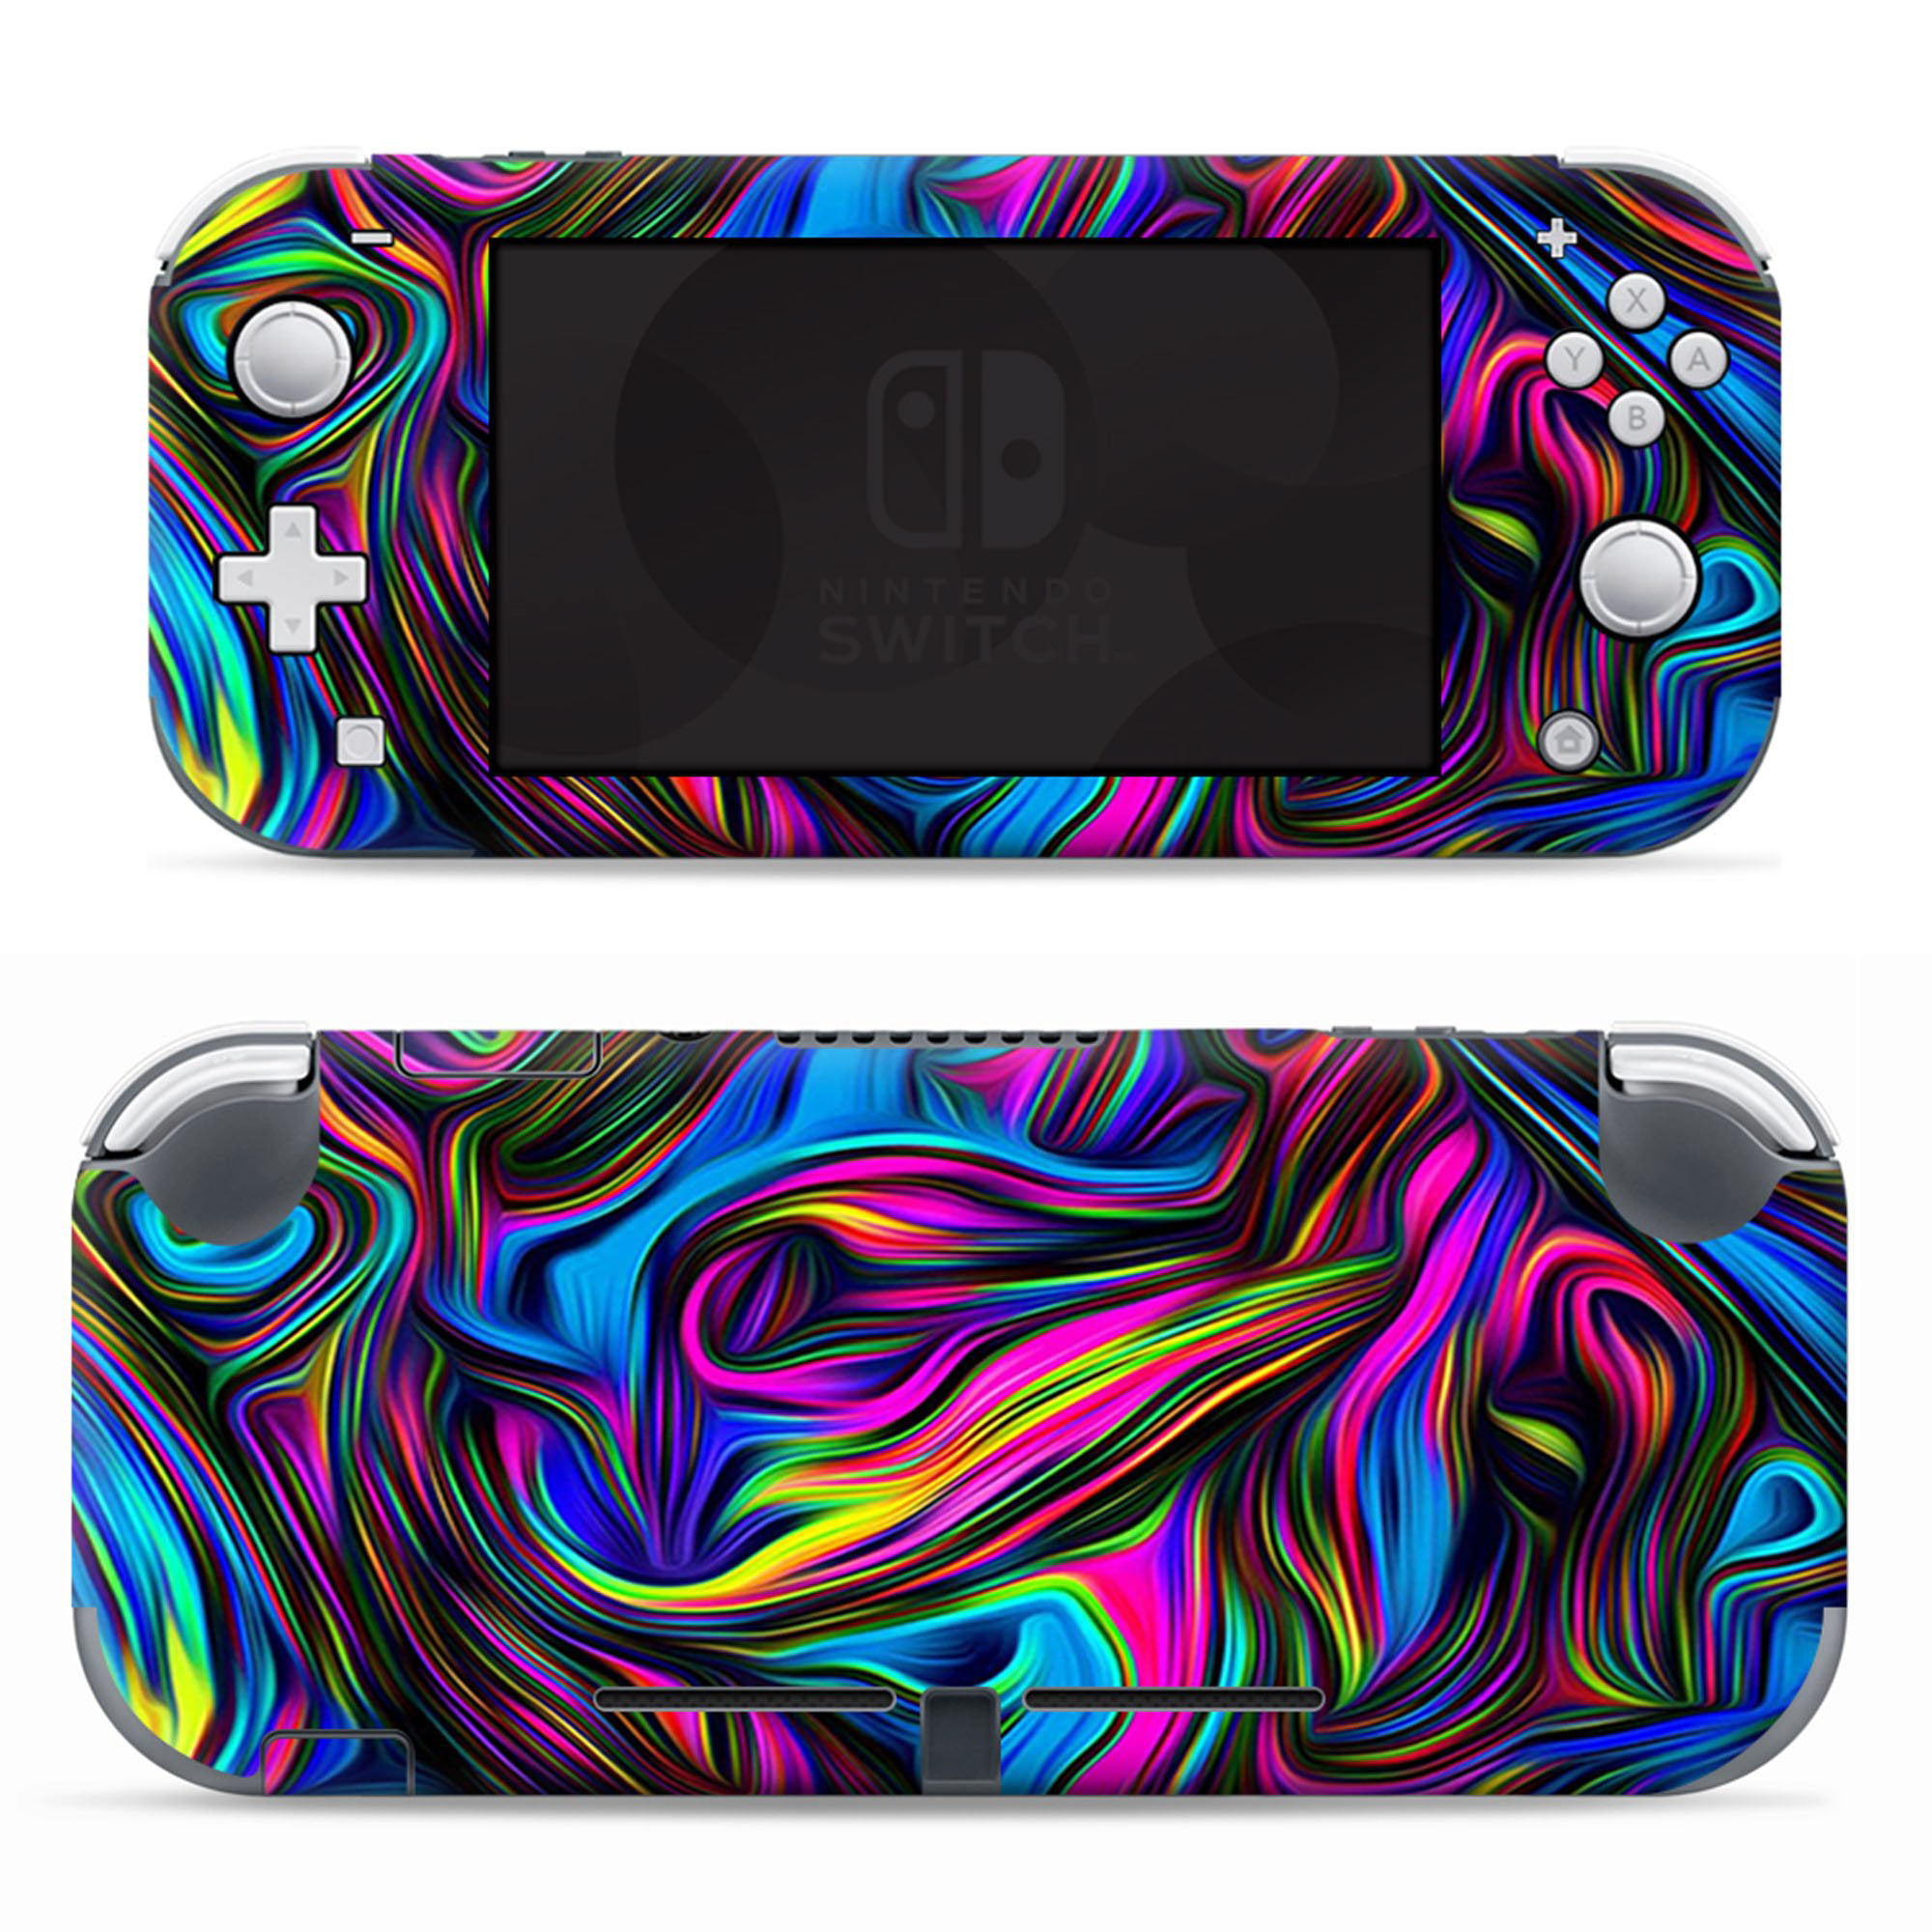 Nintendo Switch Lite Skins Decals Vinyl Wrap decal stickers skins cover Neon Color Swirl